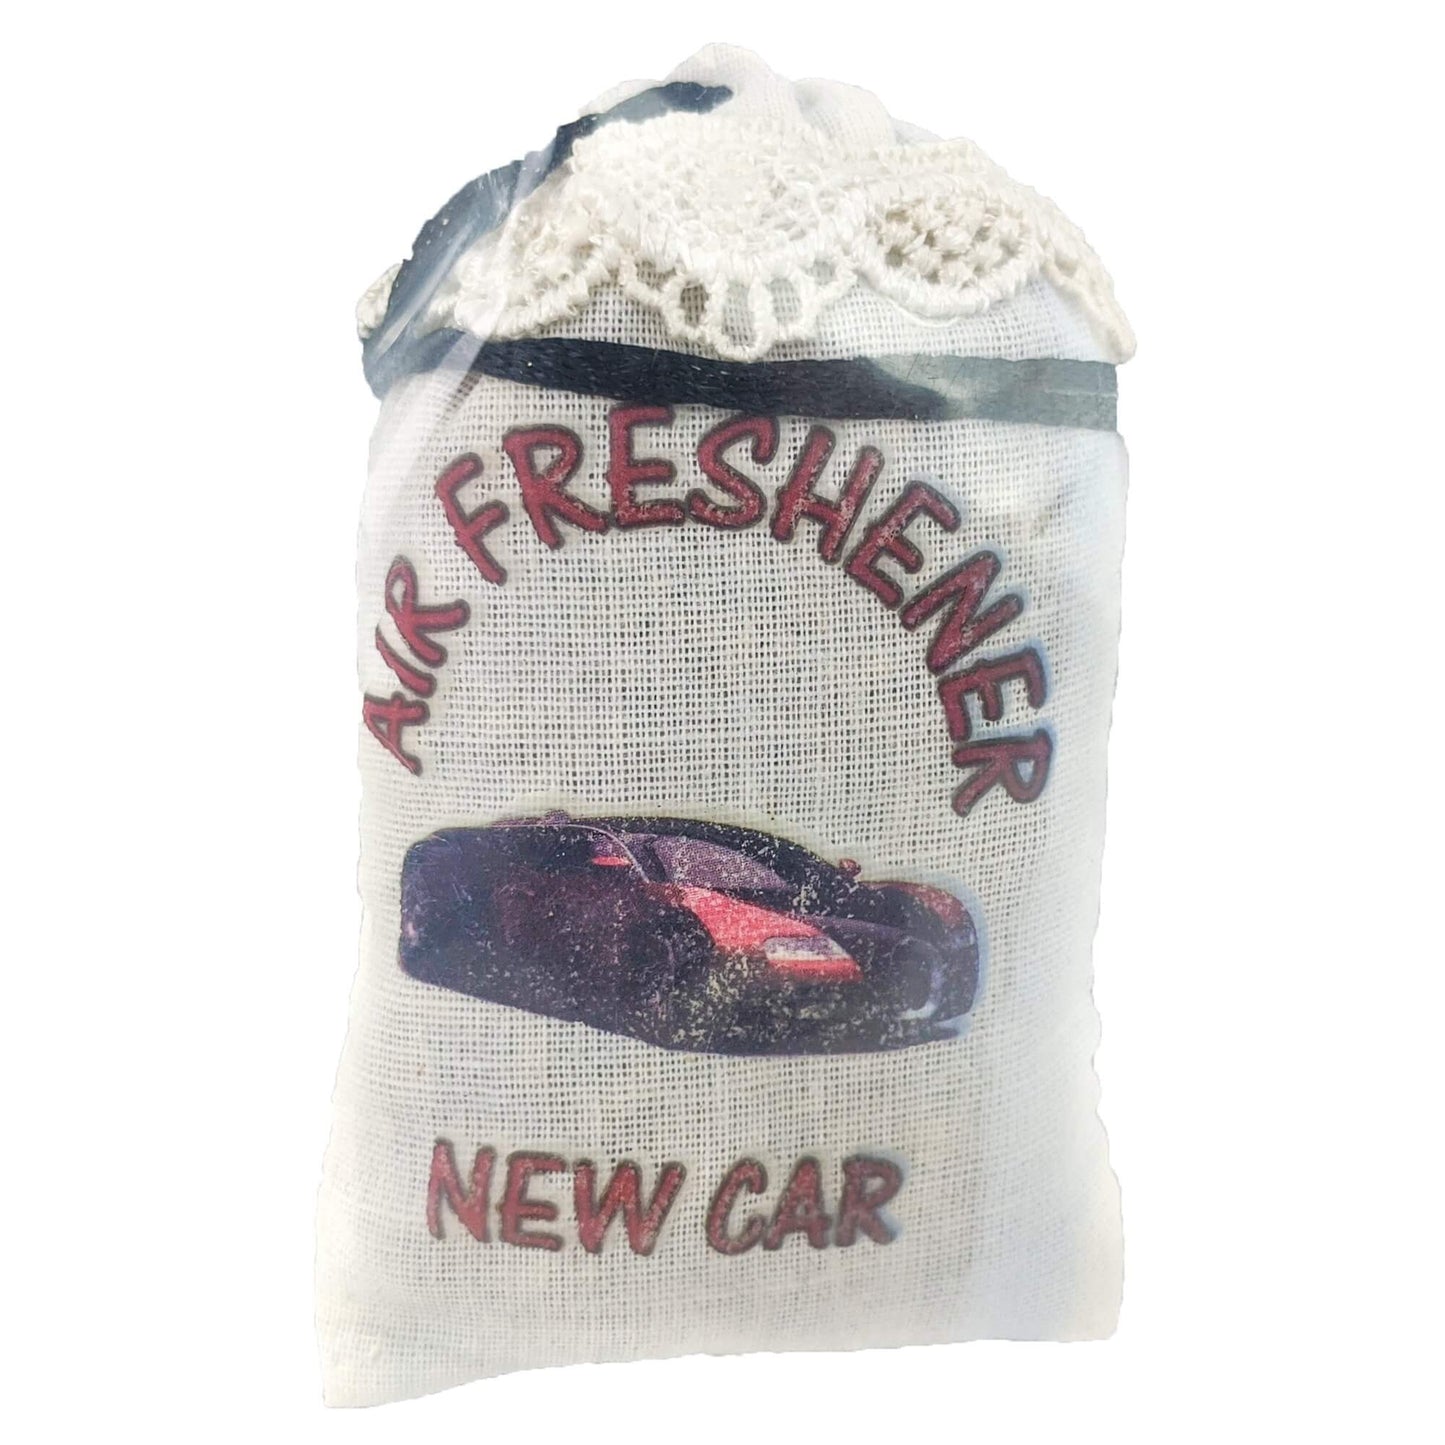 New Car Scent Blunteffects Cloth Bag Air Freshener